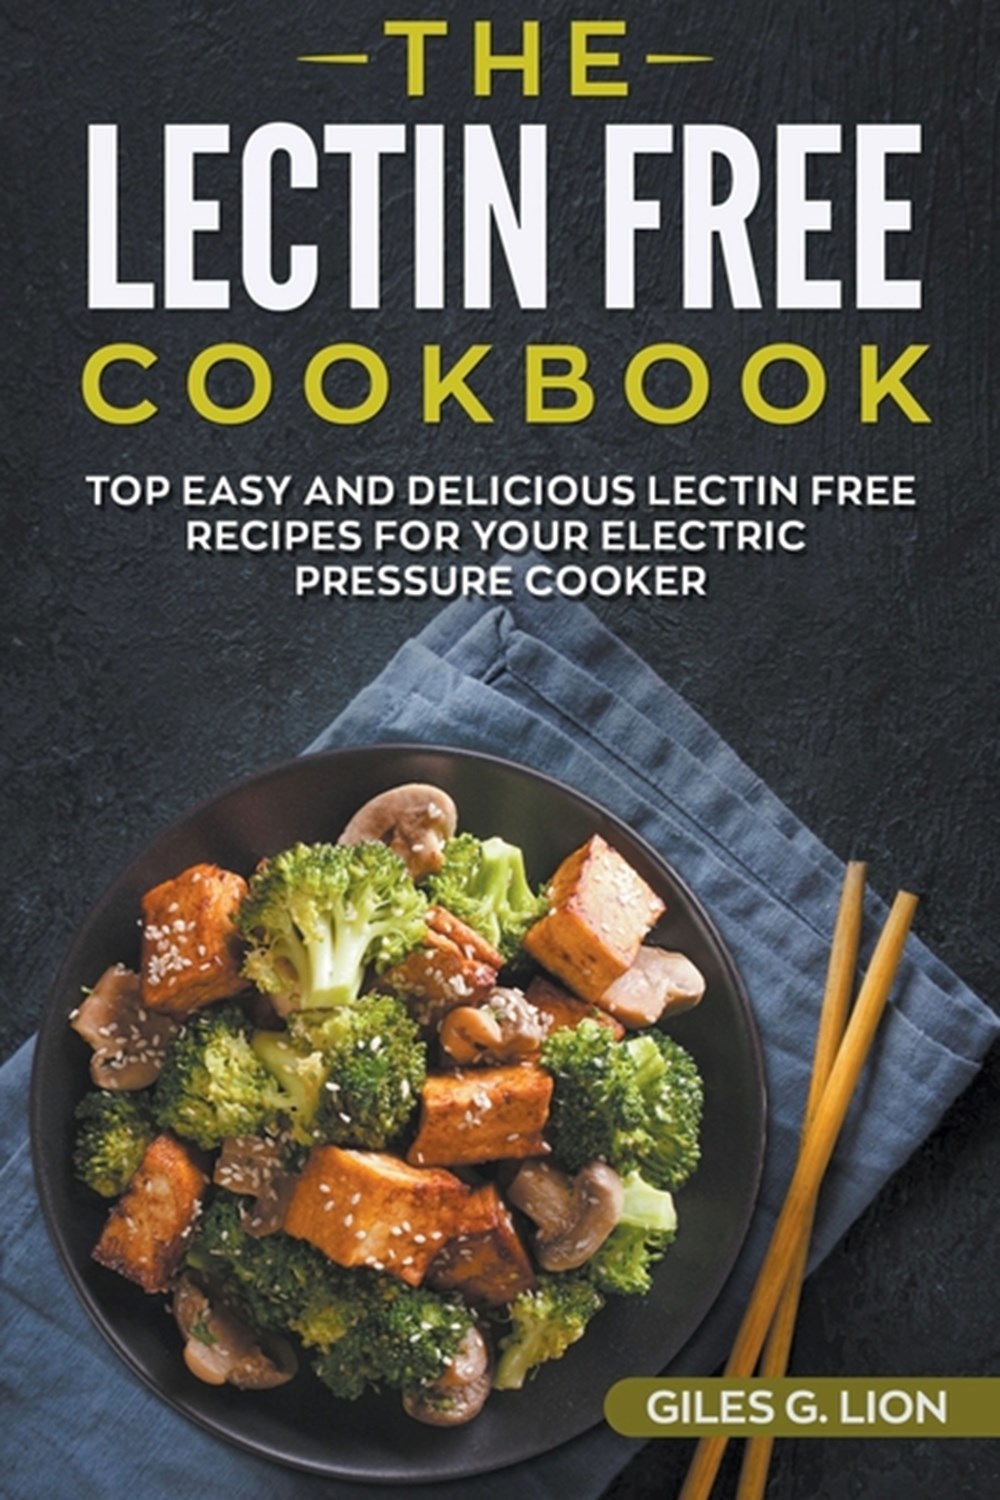 Lectin Free Cookbook: Top Easy and Delicious Lectin-Free Recipes for your Electric Pressure Cooker